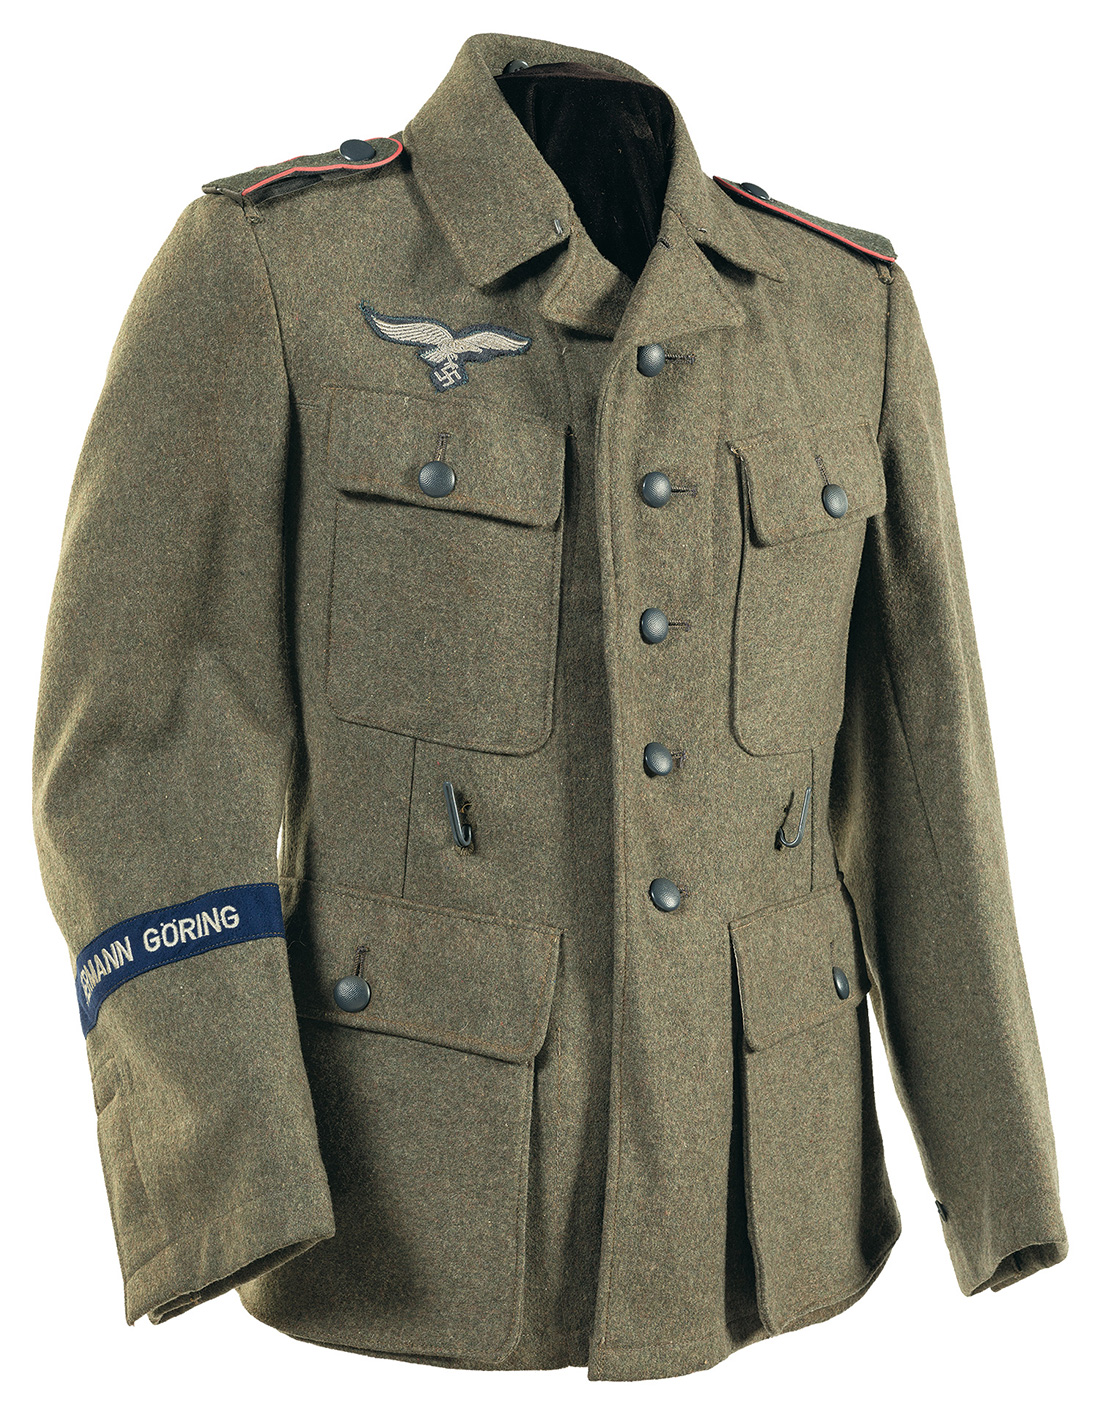 Nazi Division Hermann Goering Field Gray Tunic Configured for Ar | Rock ...